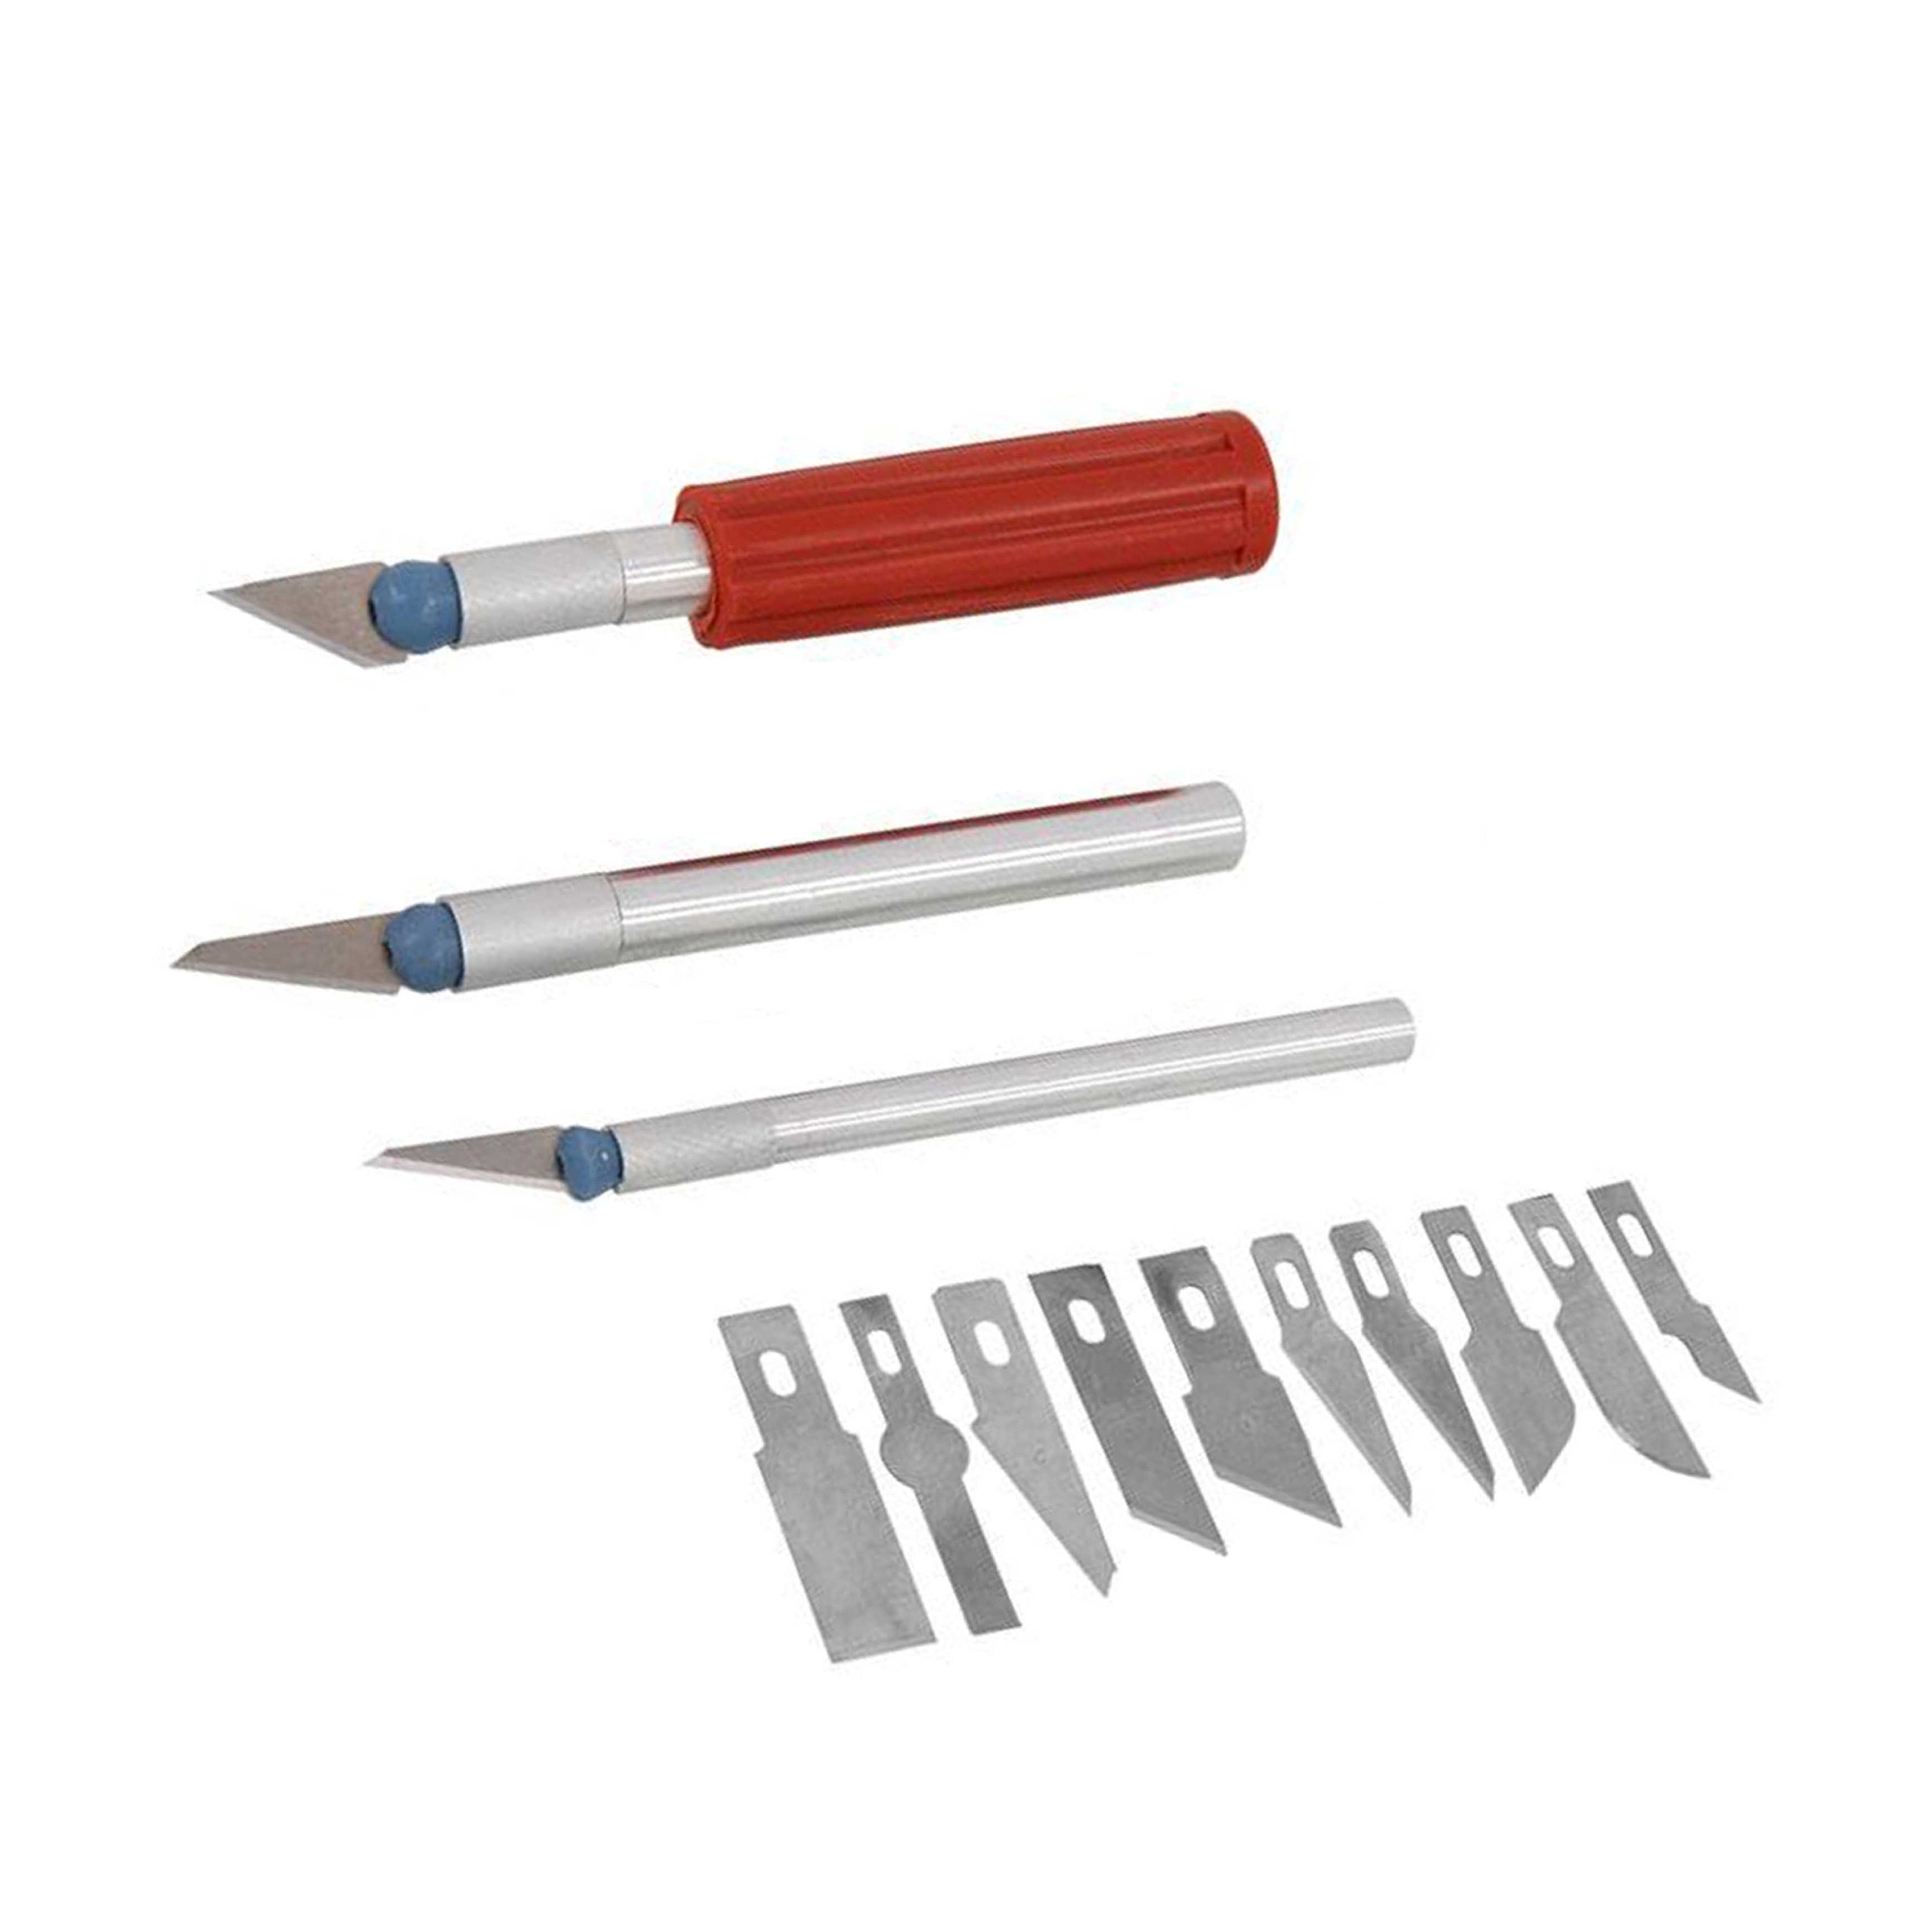 Craft Knife With 5 Blades Silver Polymer Clay Tools / Cutting Tools 